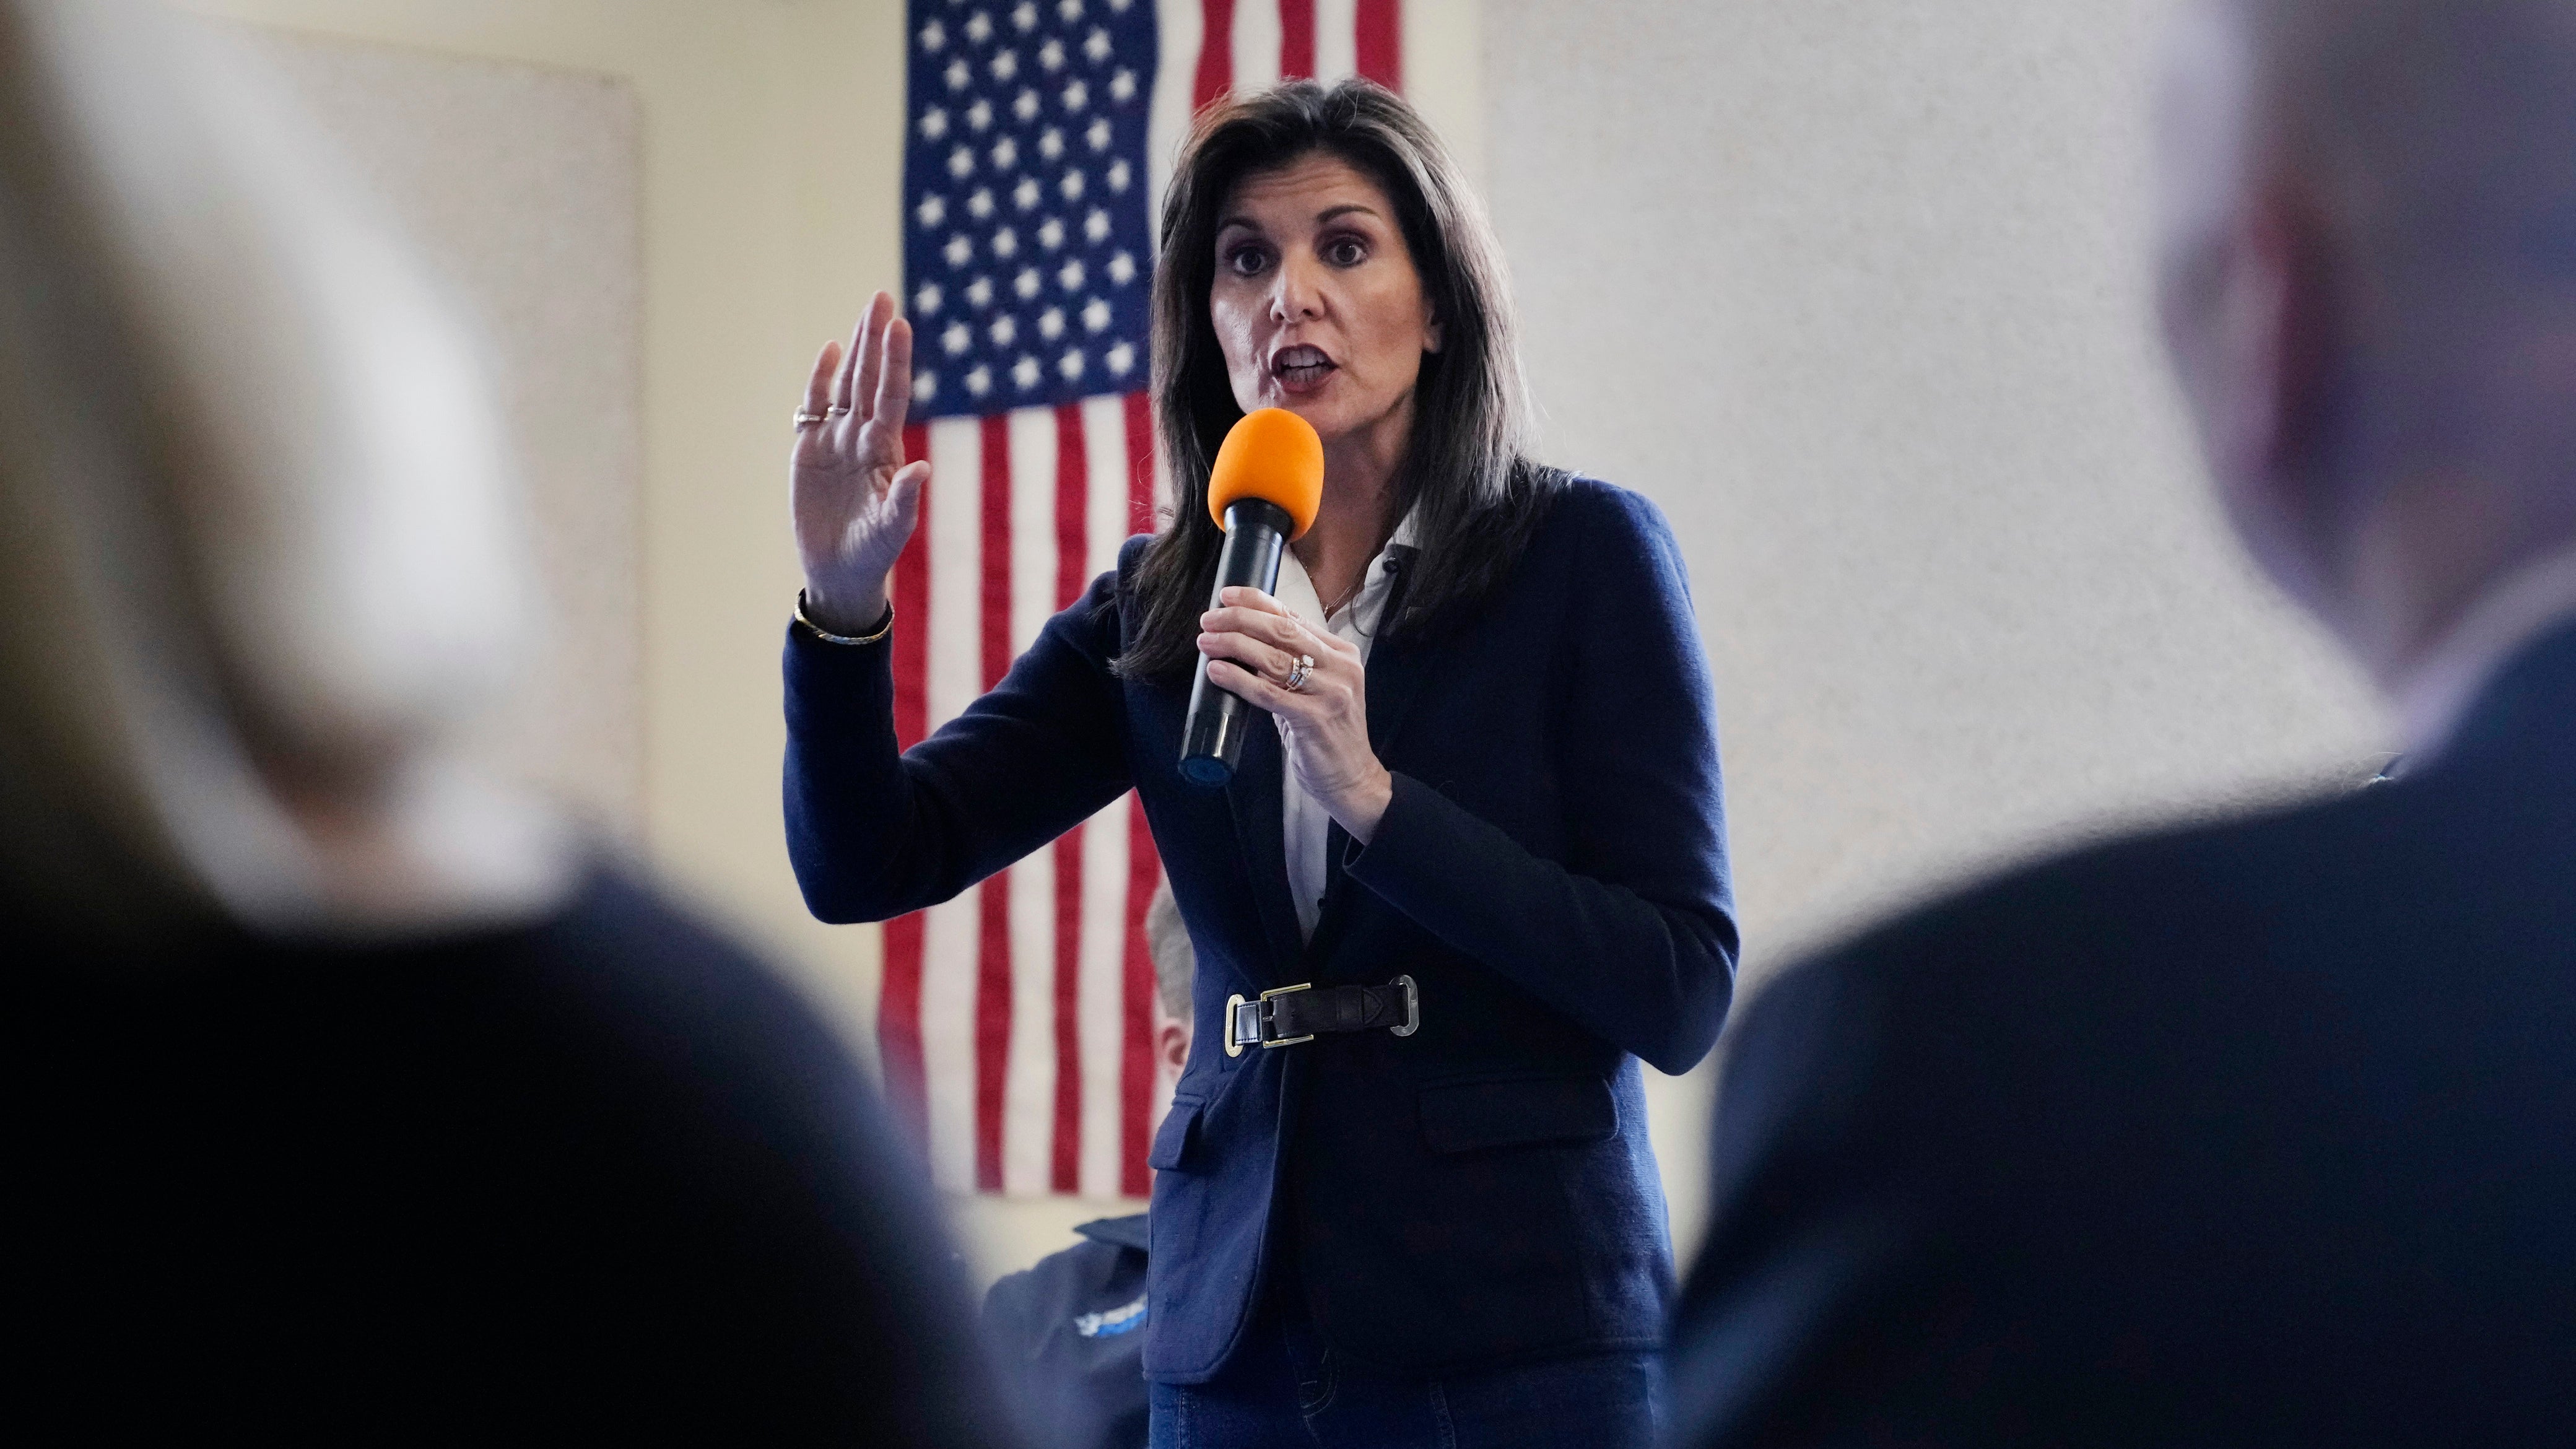 Nikki Haley has hit back at Donald Trump after he ramped up his attacks on her ahead of the New Hampshire primary on Tuesday